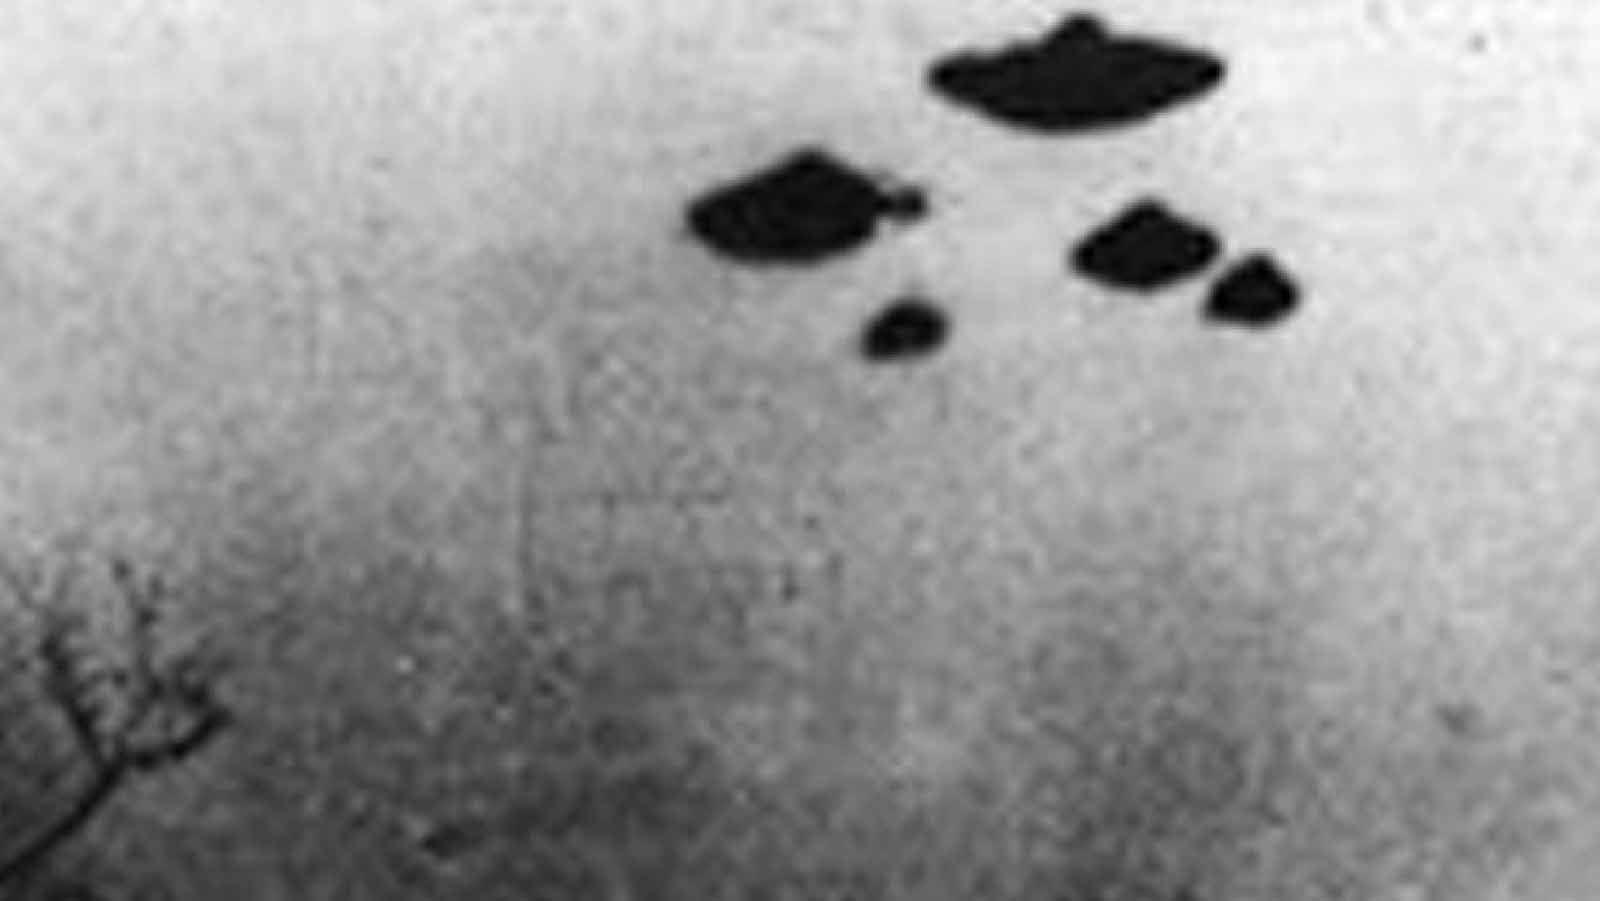 All this news from the Pentagon has people really questioning whether or not UFOS are real. So, are UFOs real, or are they just sci-fi myths?